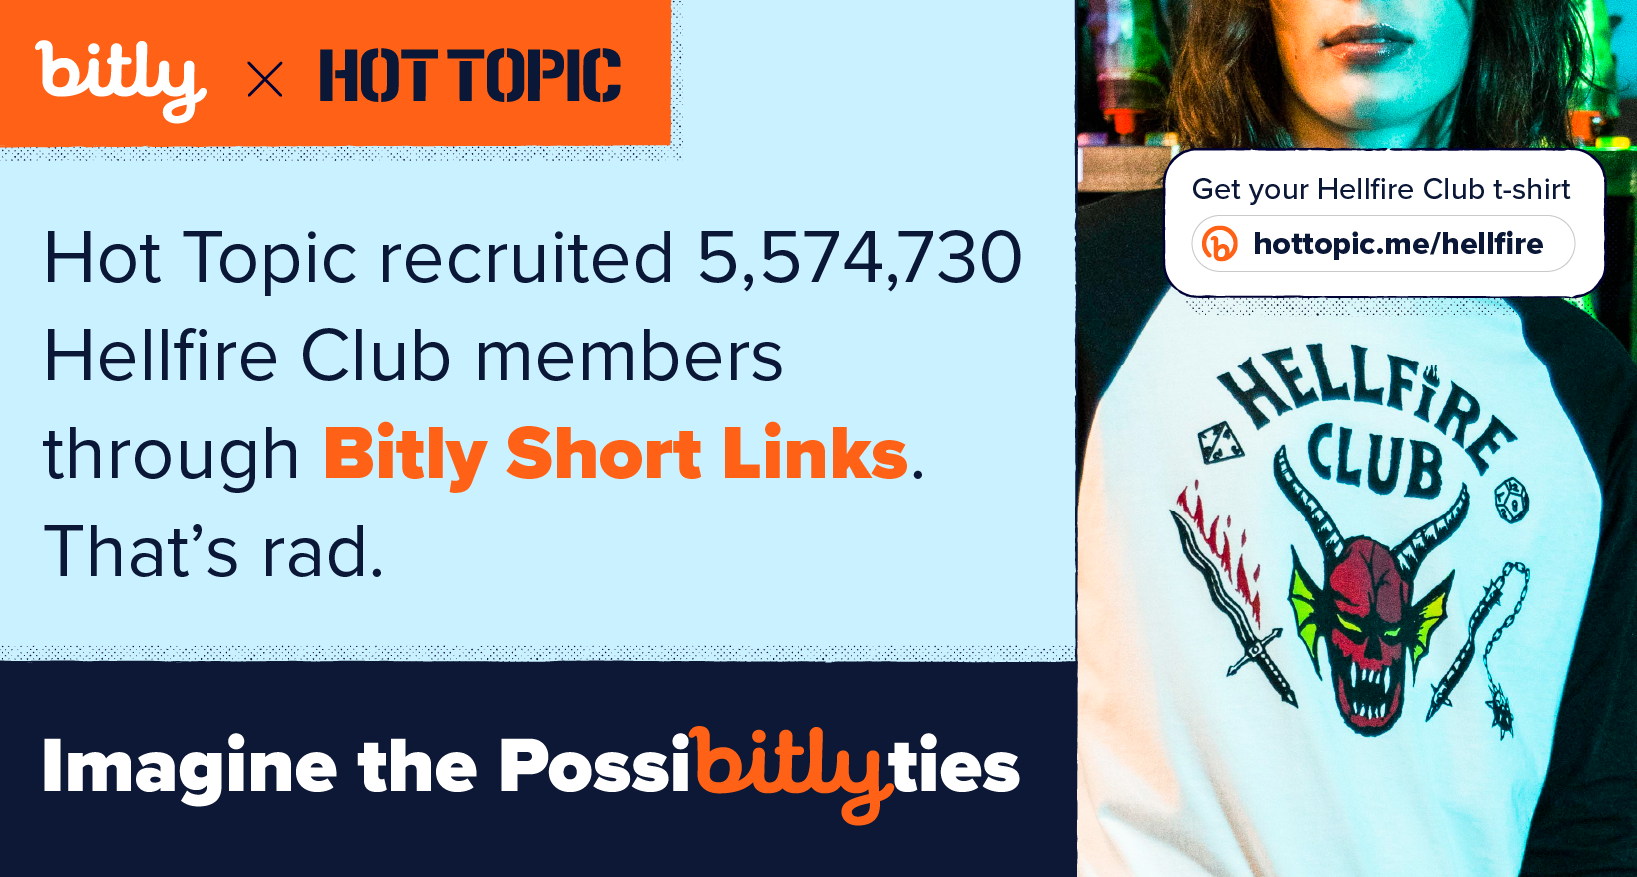 A person wearing a Hellfire Club t-shirt next to information about how Hot Topic uses Bitly short links.